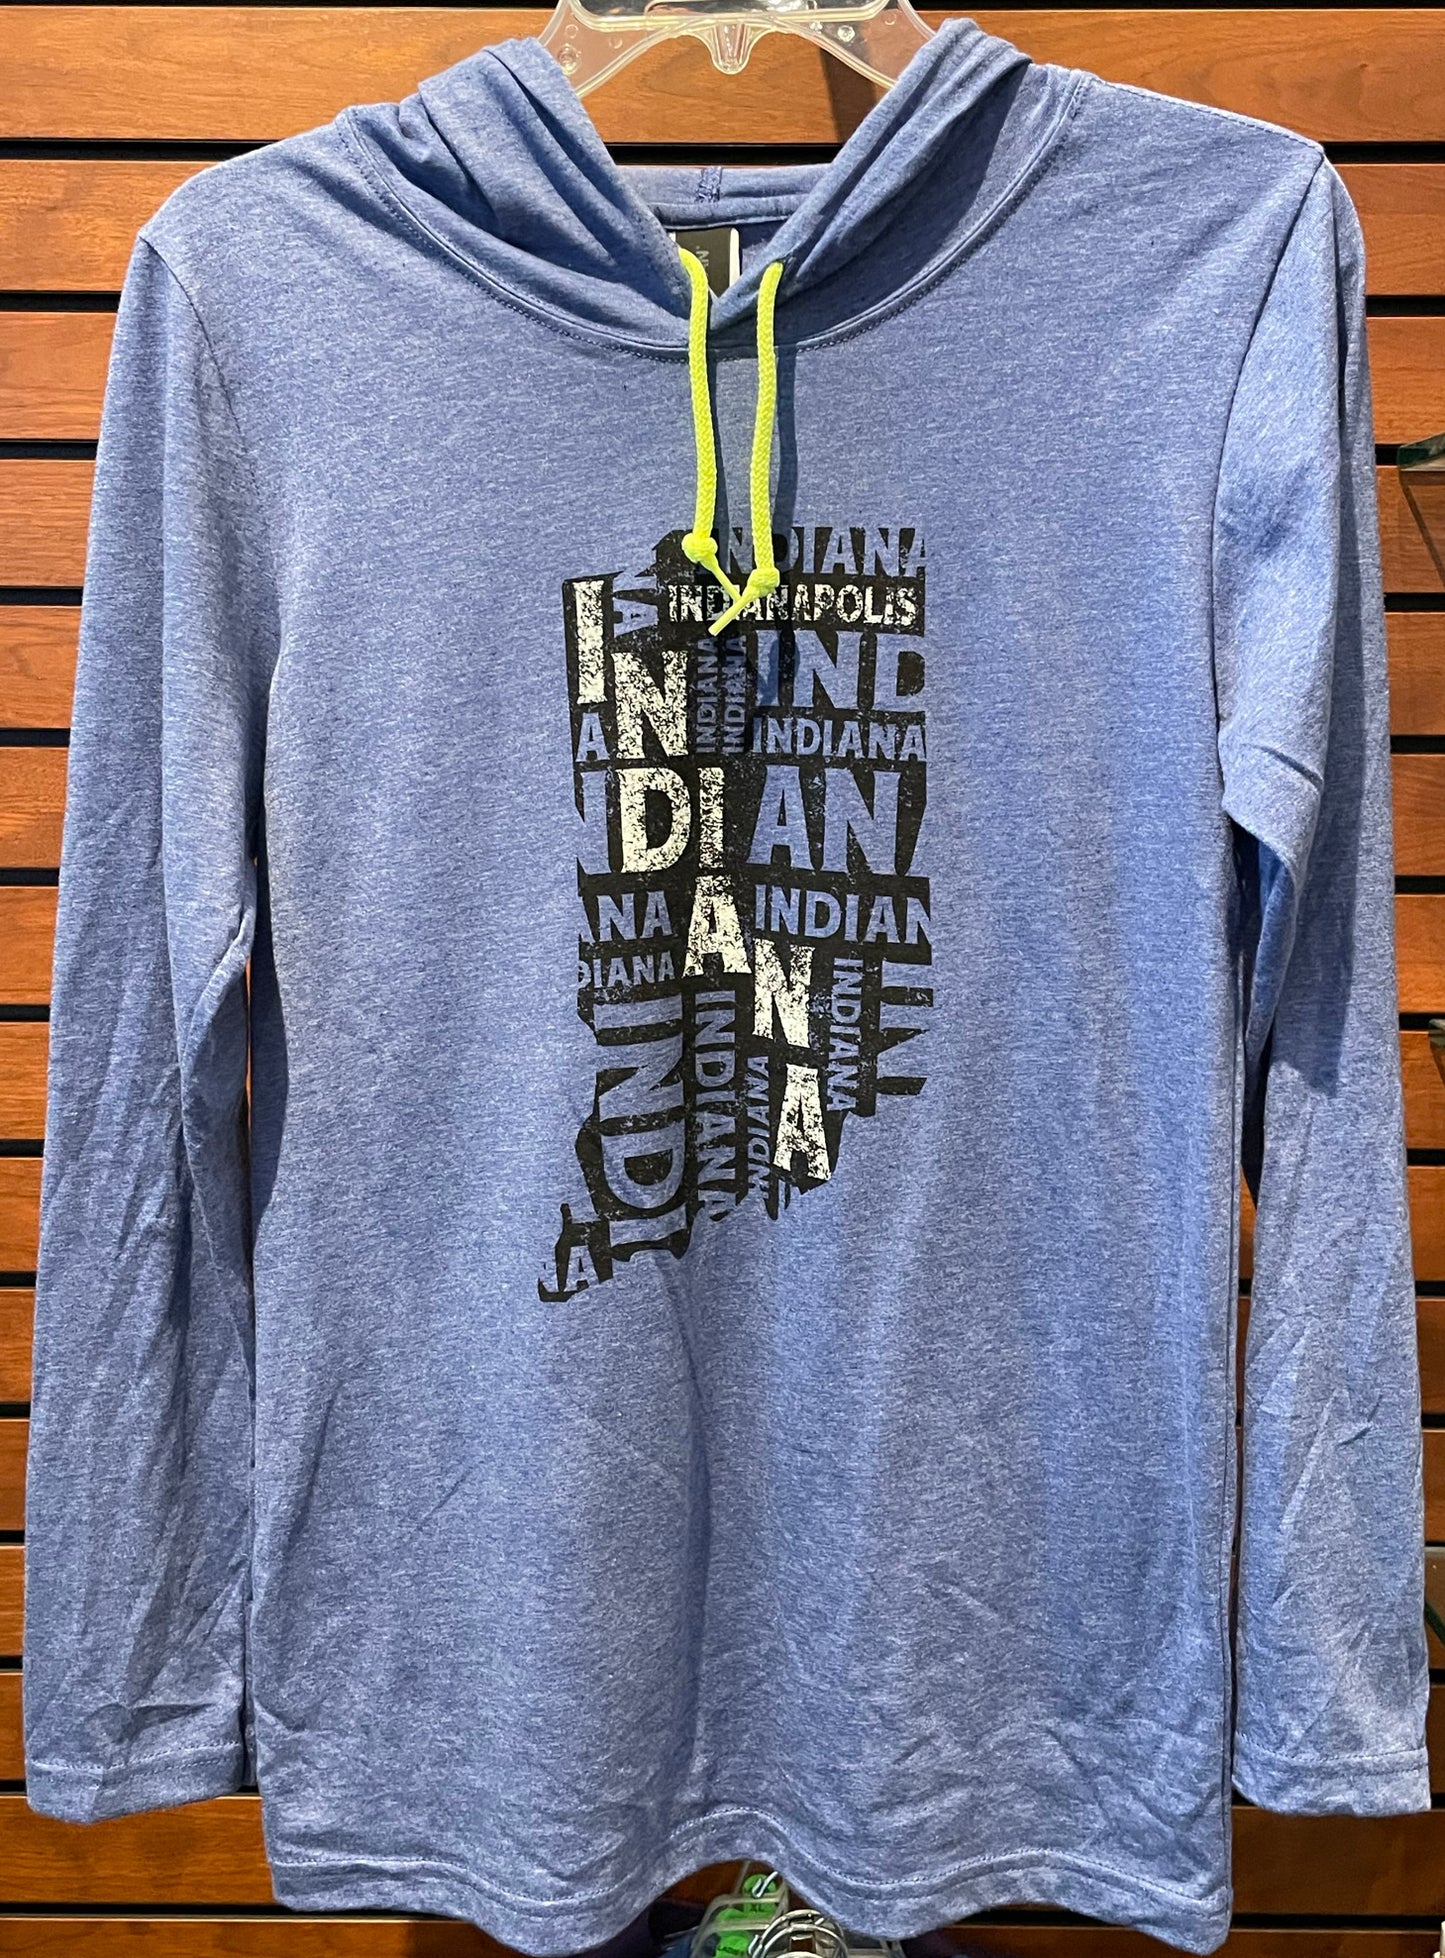 Long-Sleeved Indiana Blue or Green Hooded T-Shirt